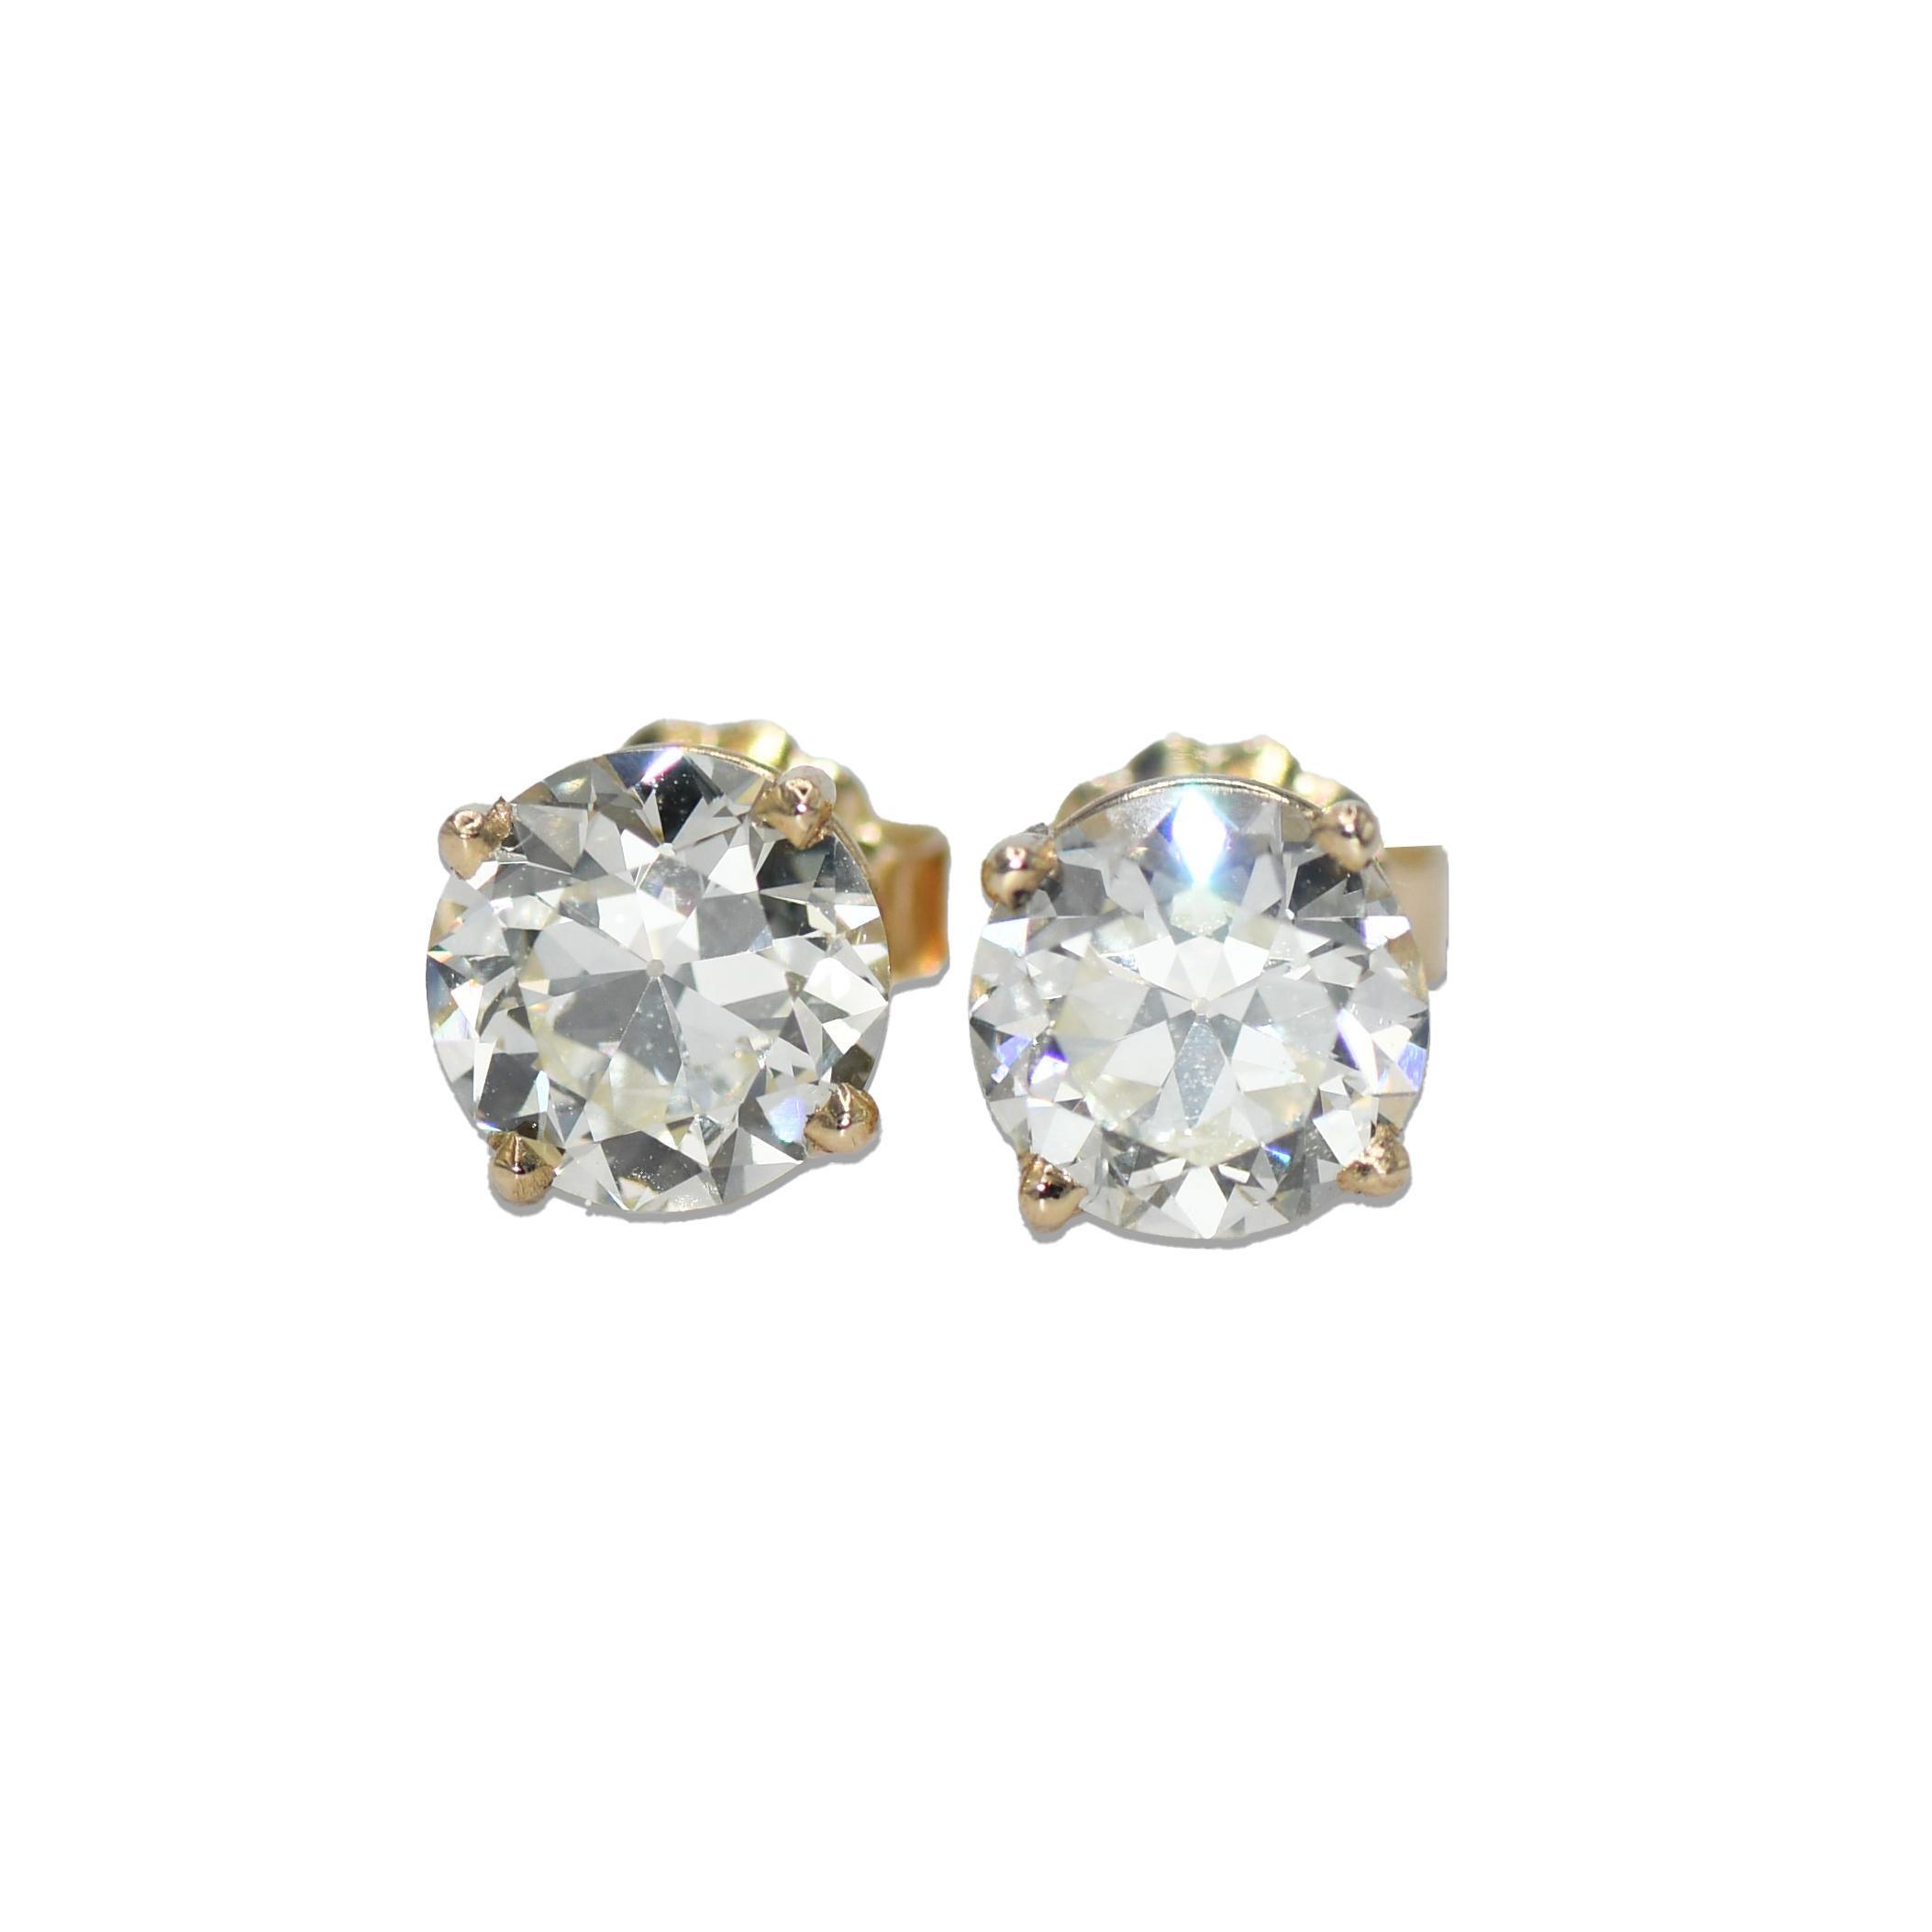 14K Yellow Gold Diamond Studs

Elevate your elegance with these stunning 14k yellow gold diamond stud earrings, a timeless and sophisticated addition to your jewelry collection. Crafted in genuine 14k yellow gold, these diamond studs are not only